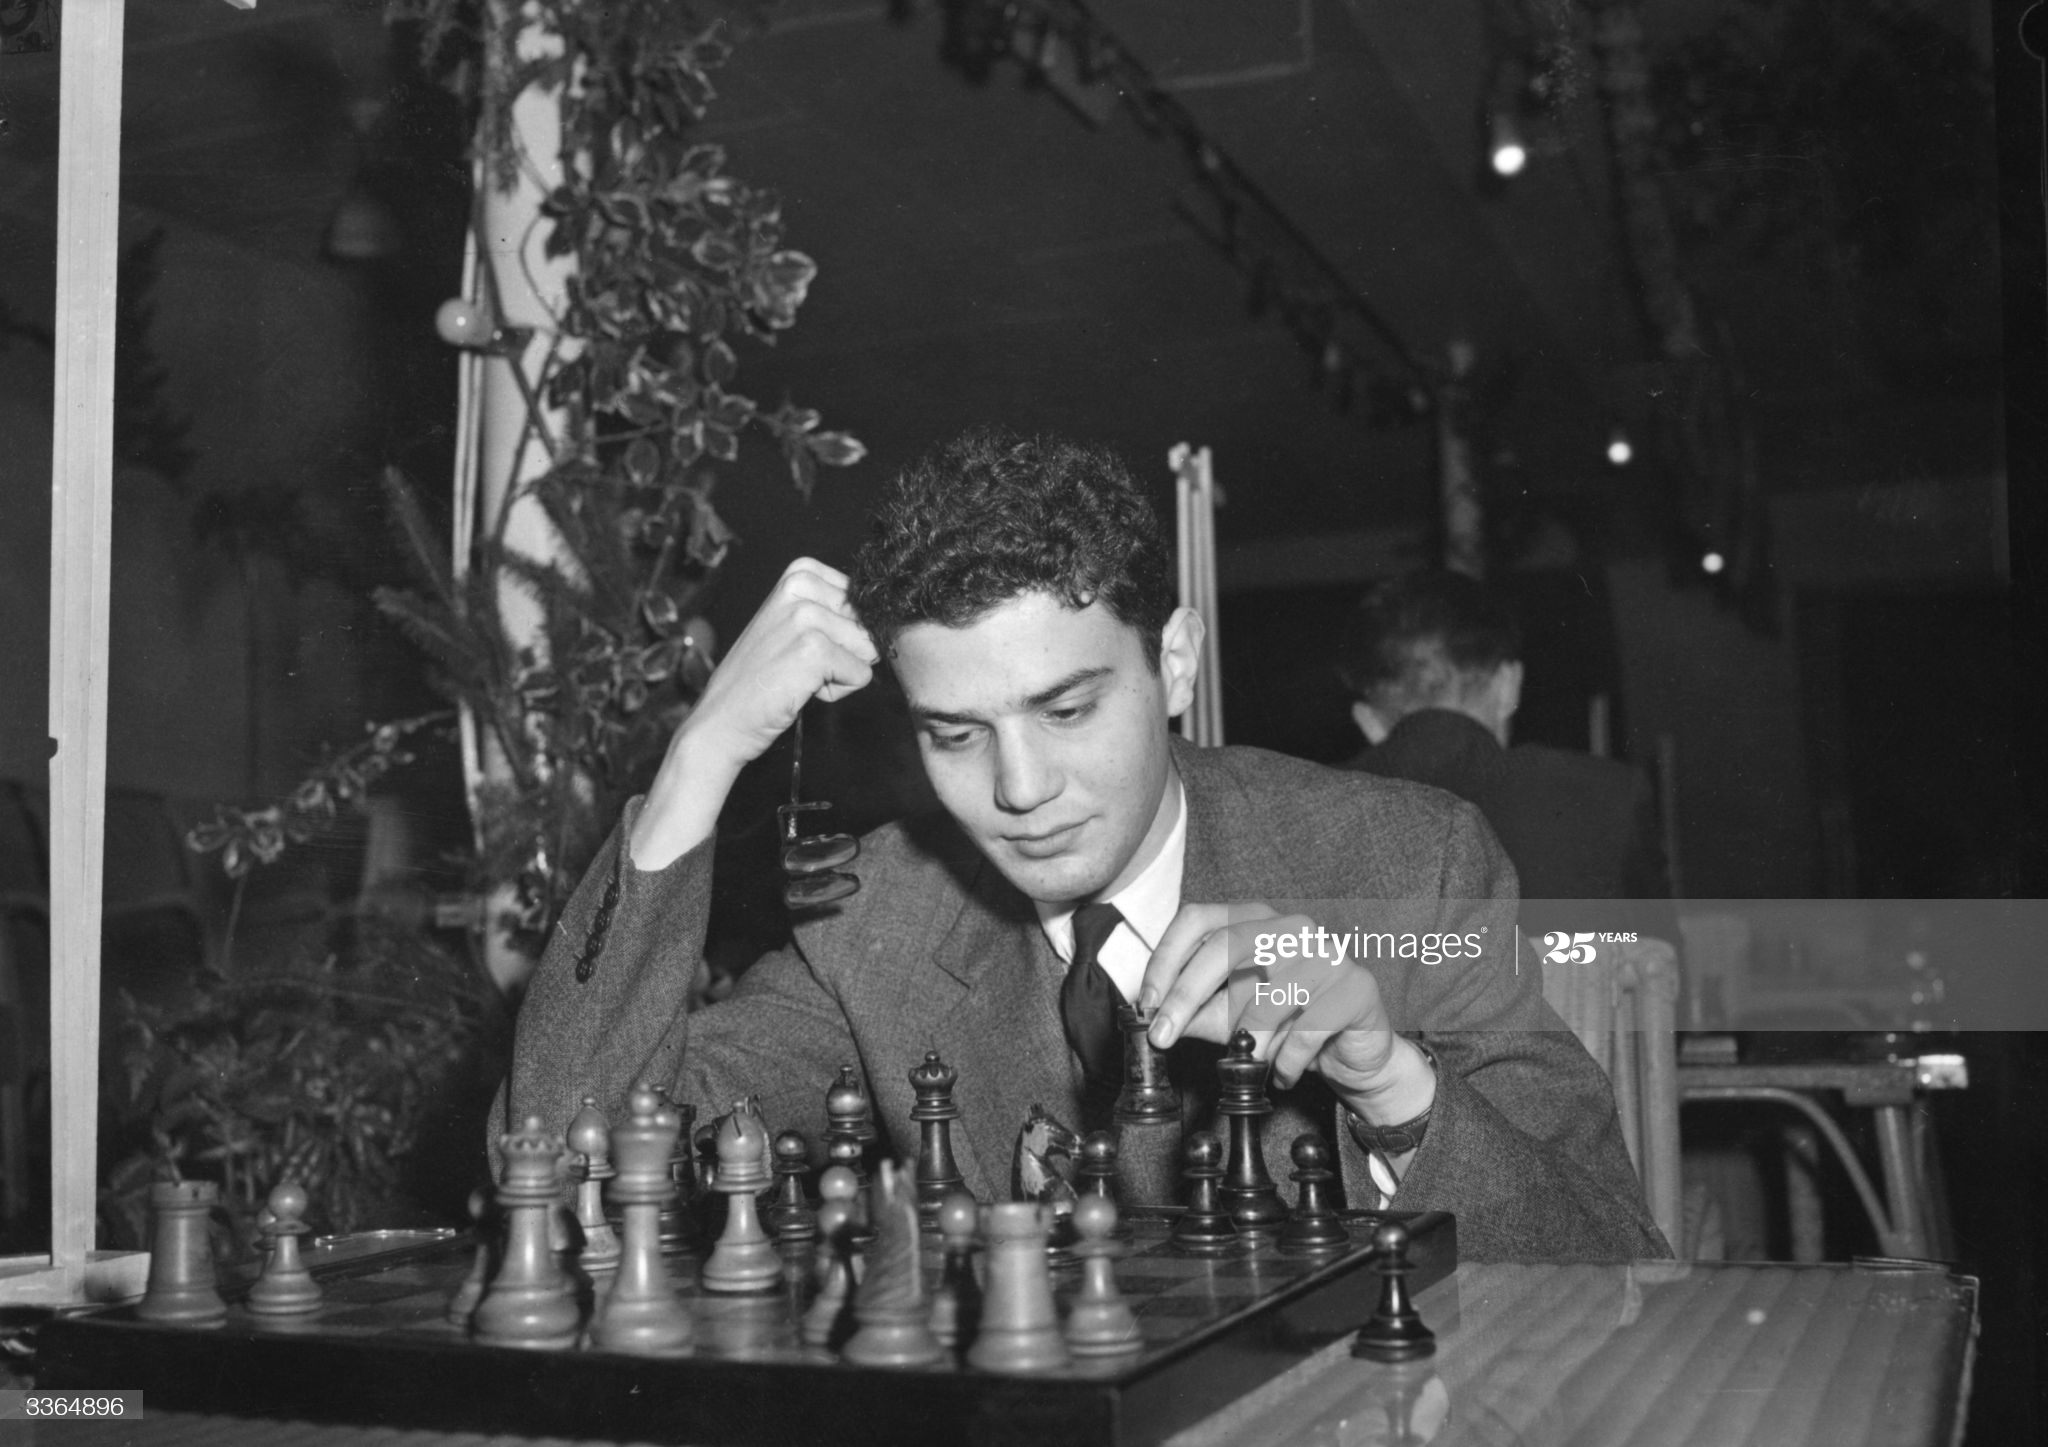 28th December 1955: Israeli chess player Raaphy Persitz in play at the International Chess Congress at Hastings. (Photo by Folb/Topical Press Agency/Getty Images)